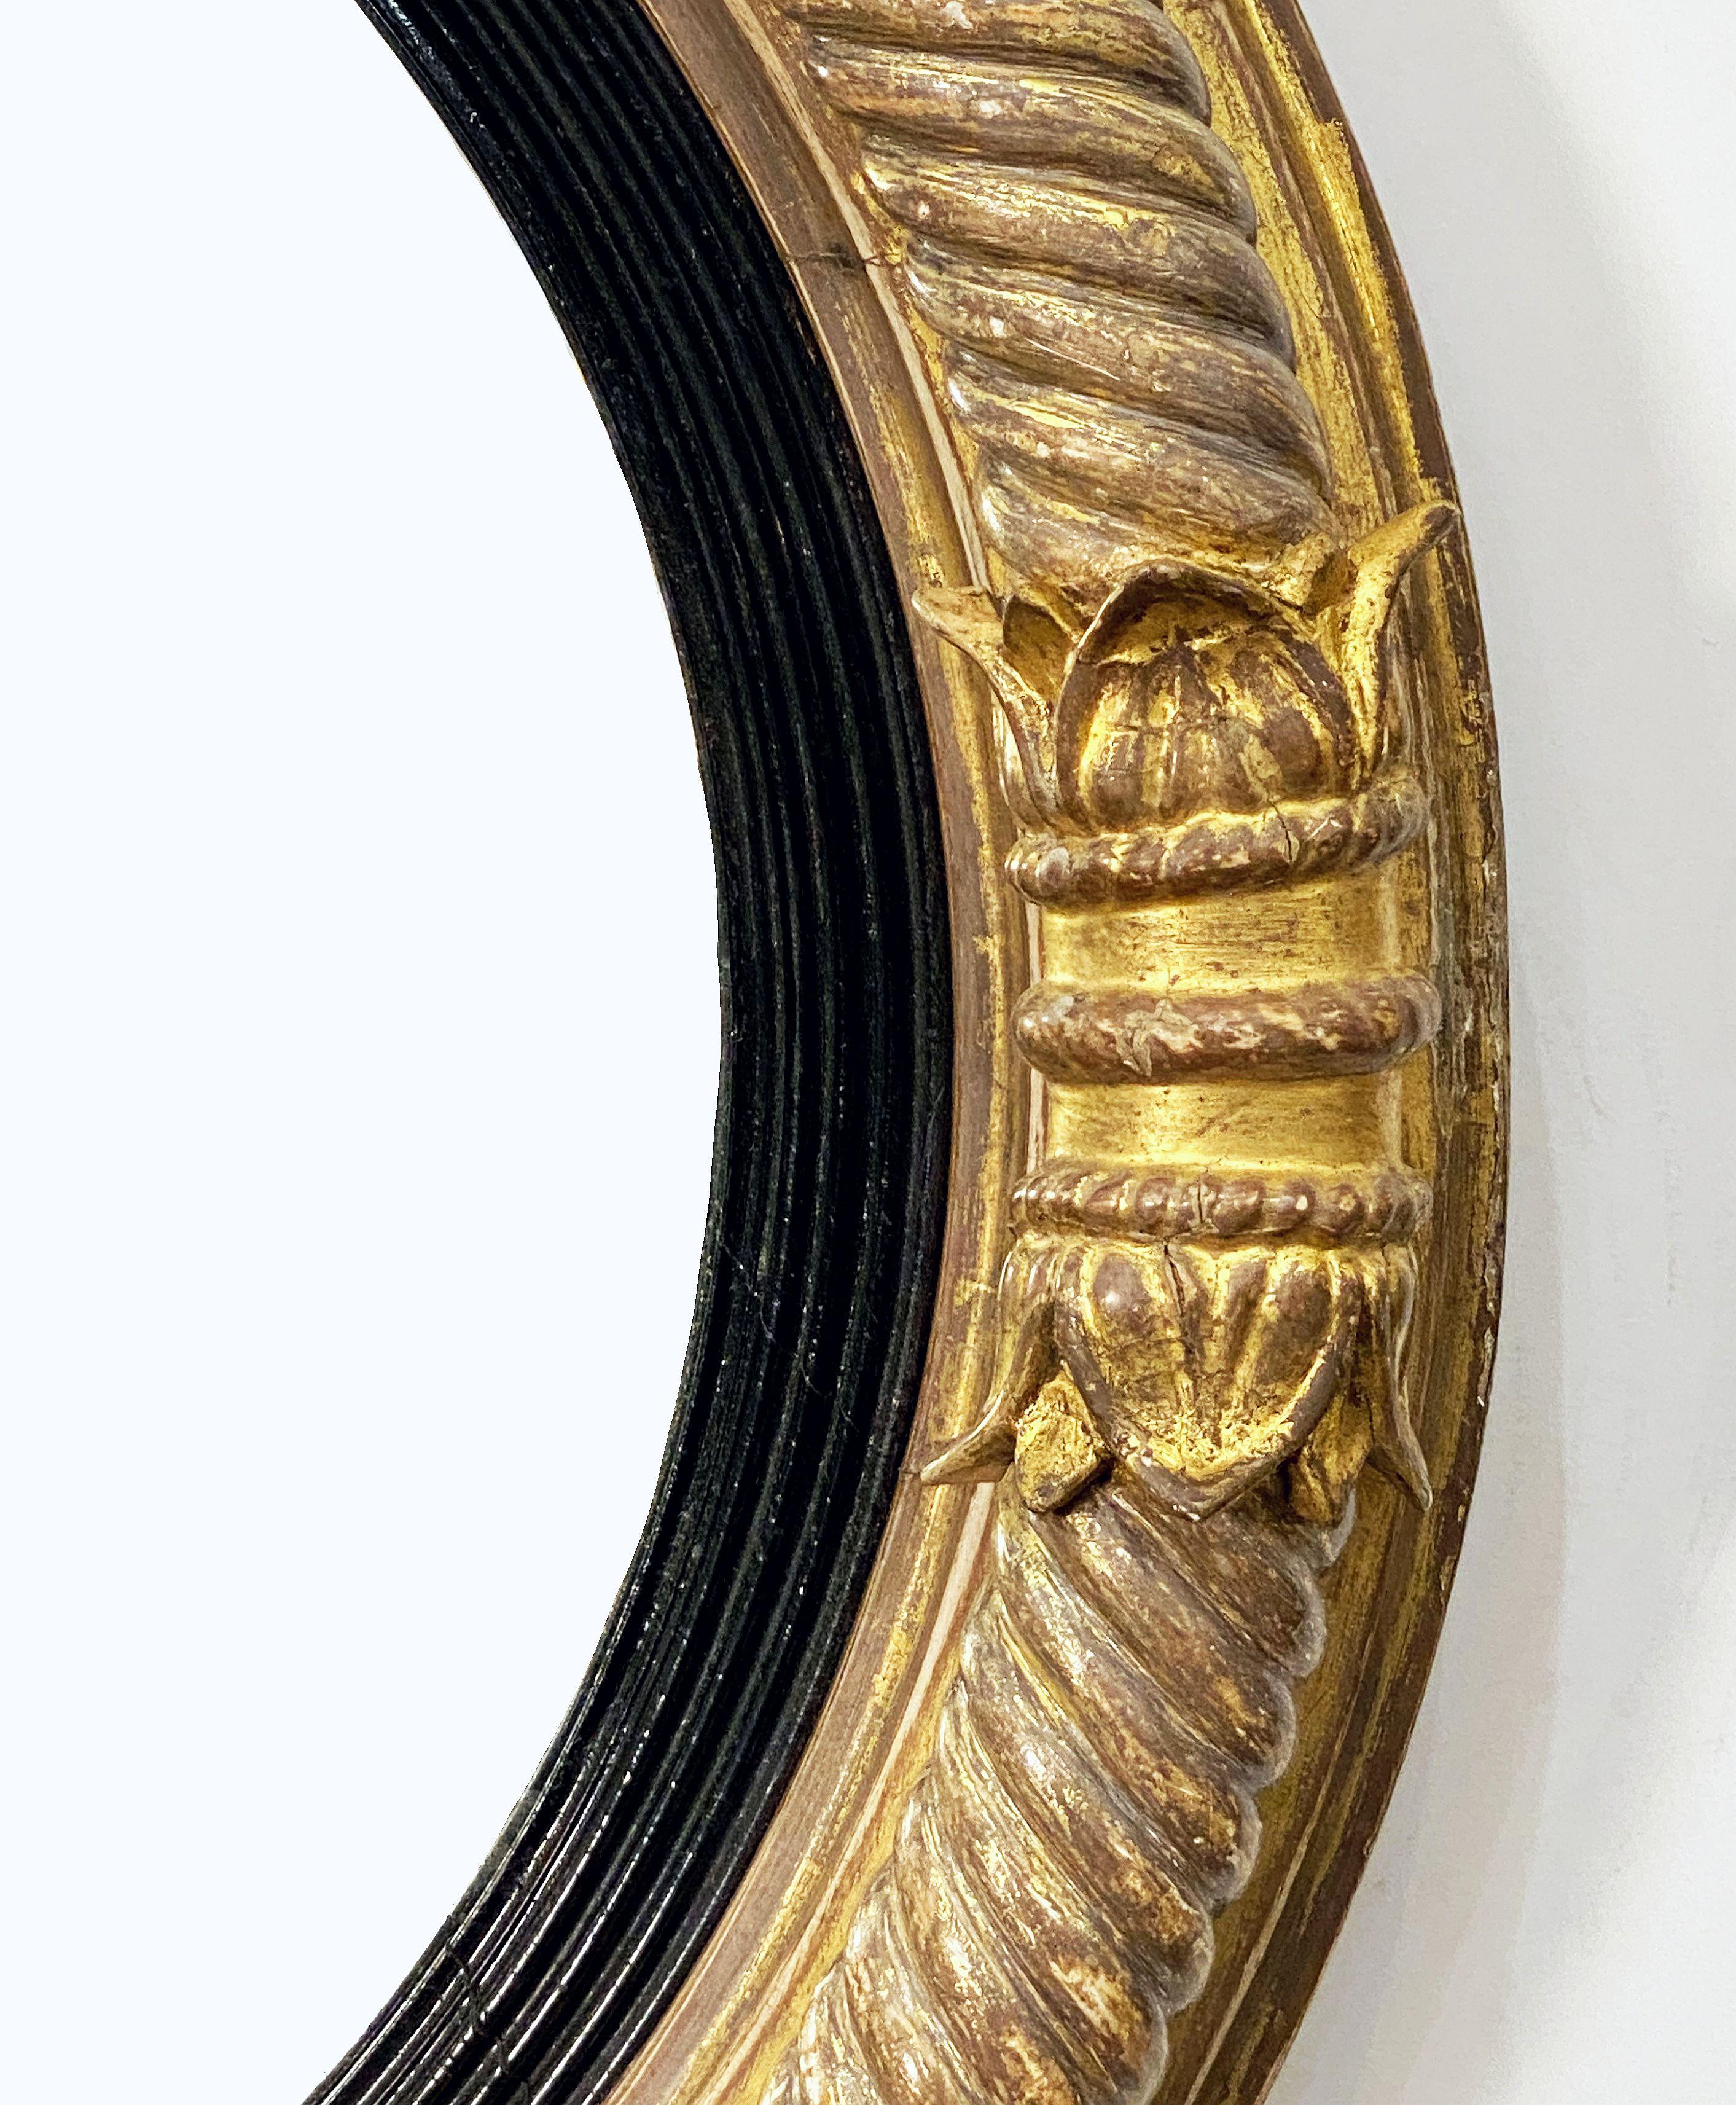 English Gilt and Ebony Convex Mirror from the Regency Era (Diameter 21 1/4) For Sale 5